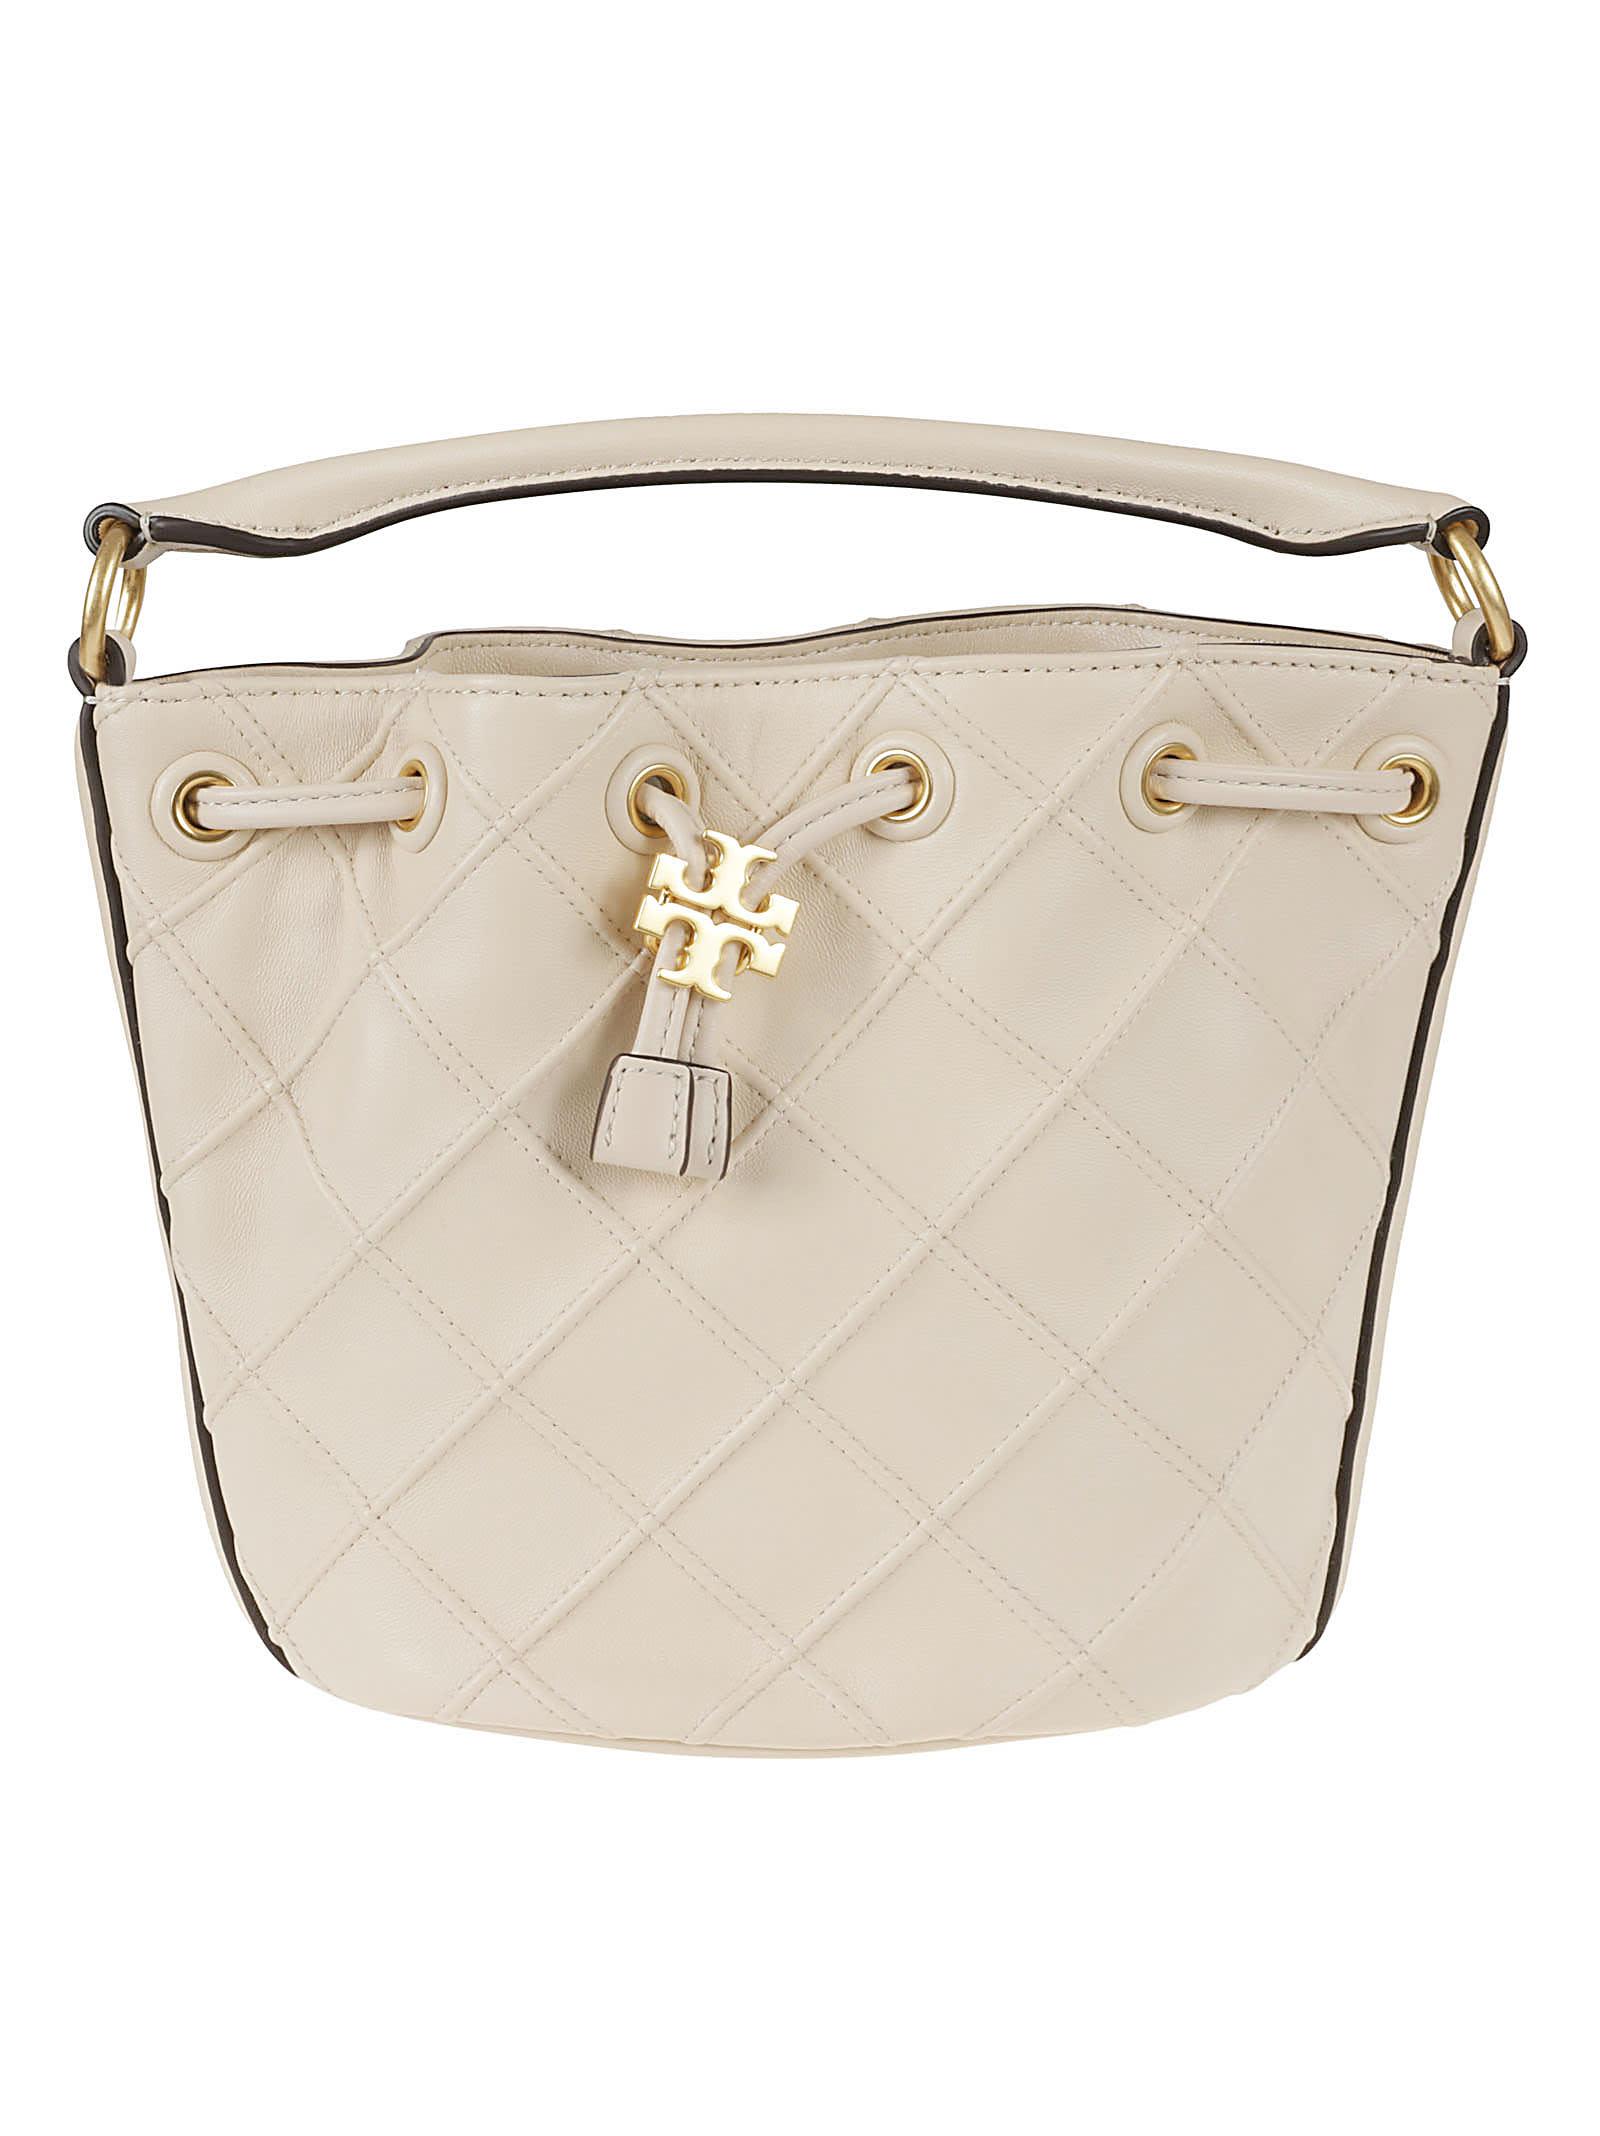 Tory Burch Fleming Soft Bucket Bag in Natural | Lyst